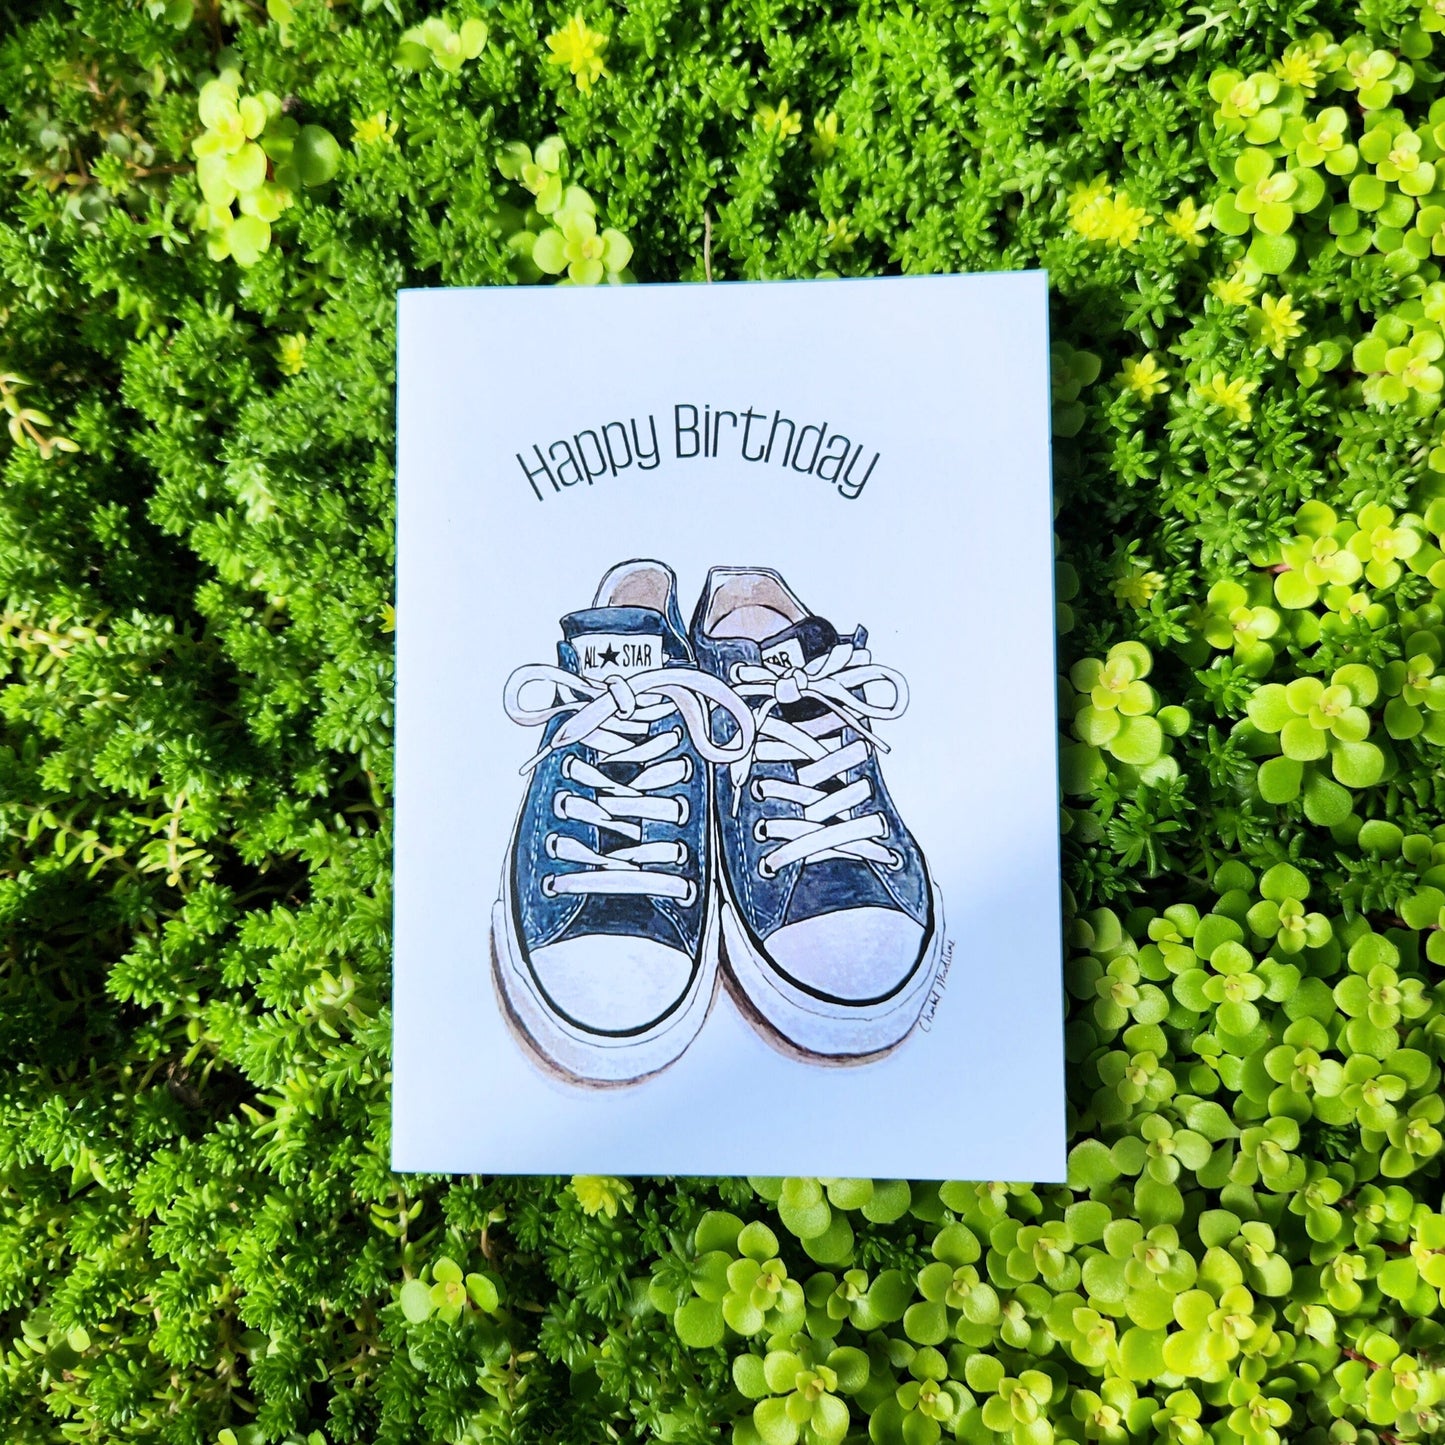 Happy birthday sneaker lover card, Kicks, Trainers shoe card, Blue all star, Fun birthday card for her, for him, for husband, wife, Friend